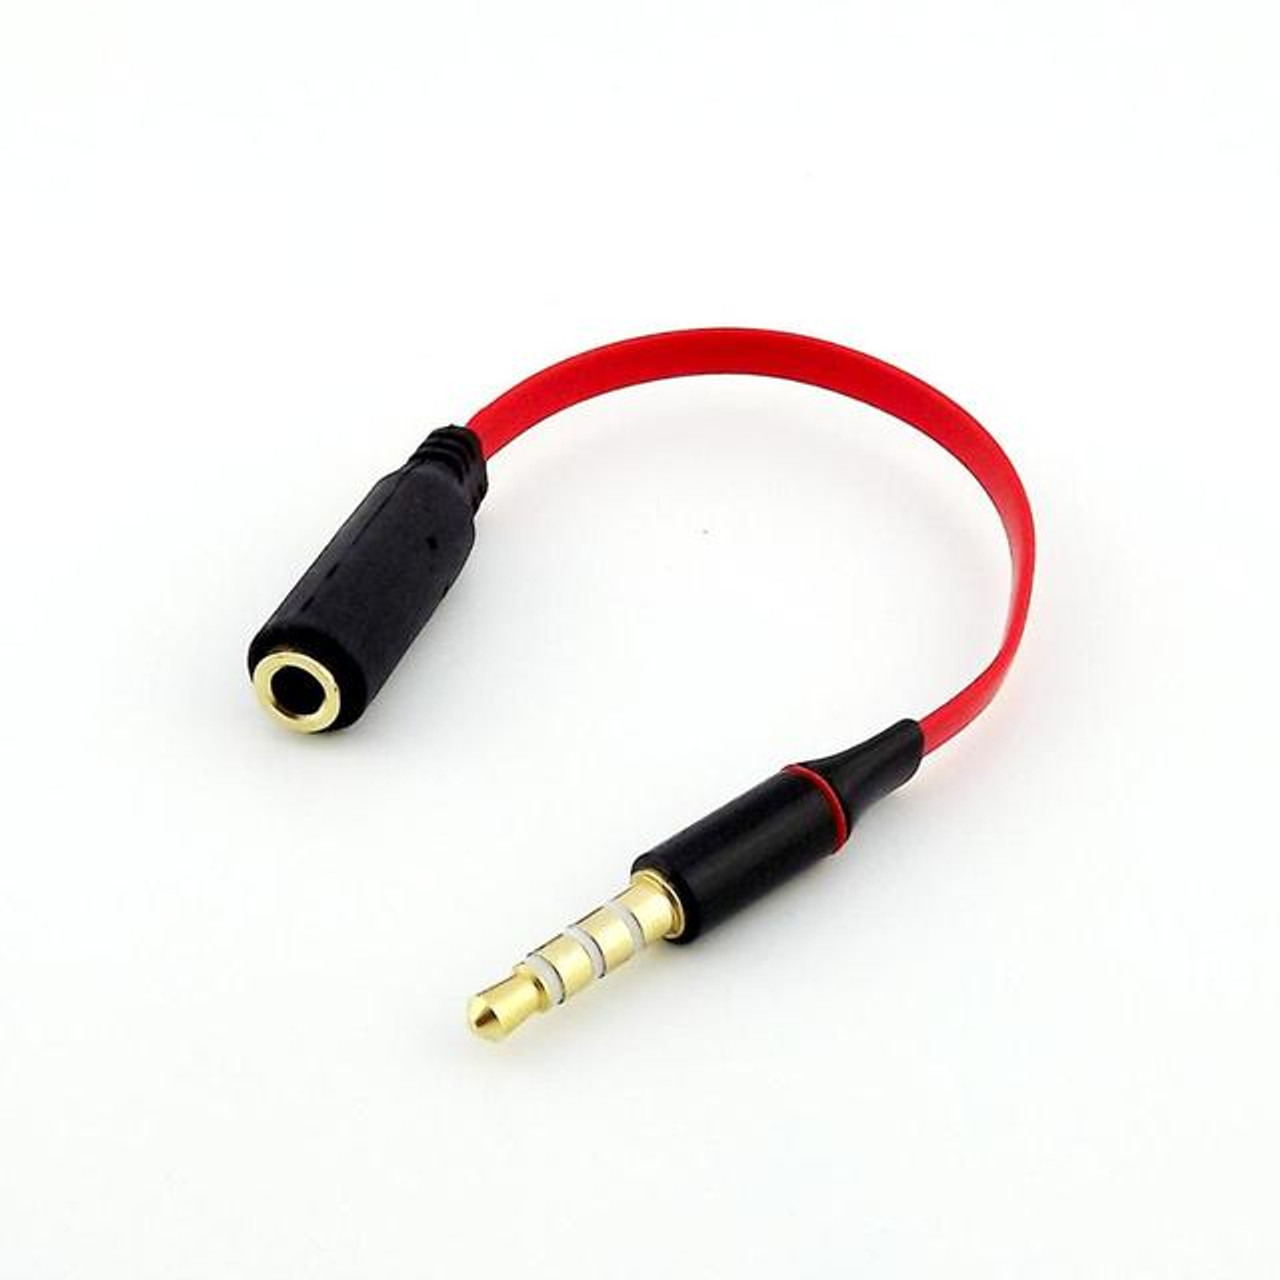 How To Tell If Audio Cable Is Ctia